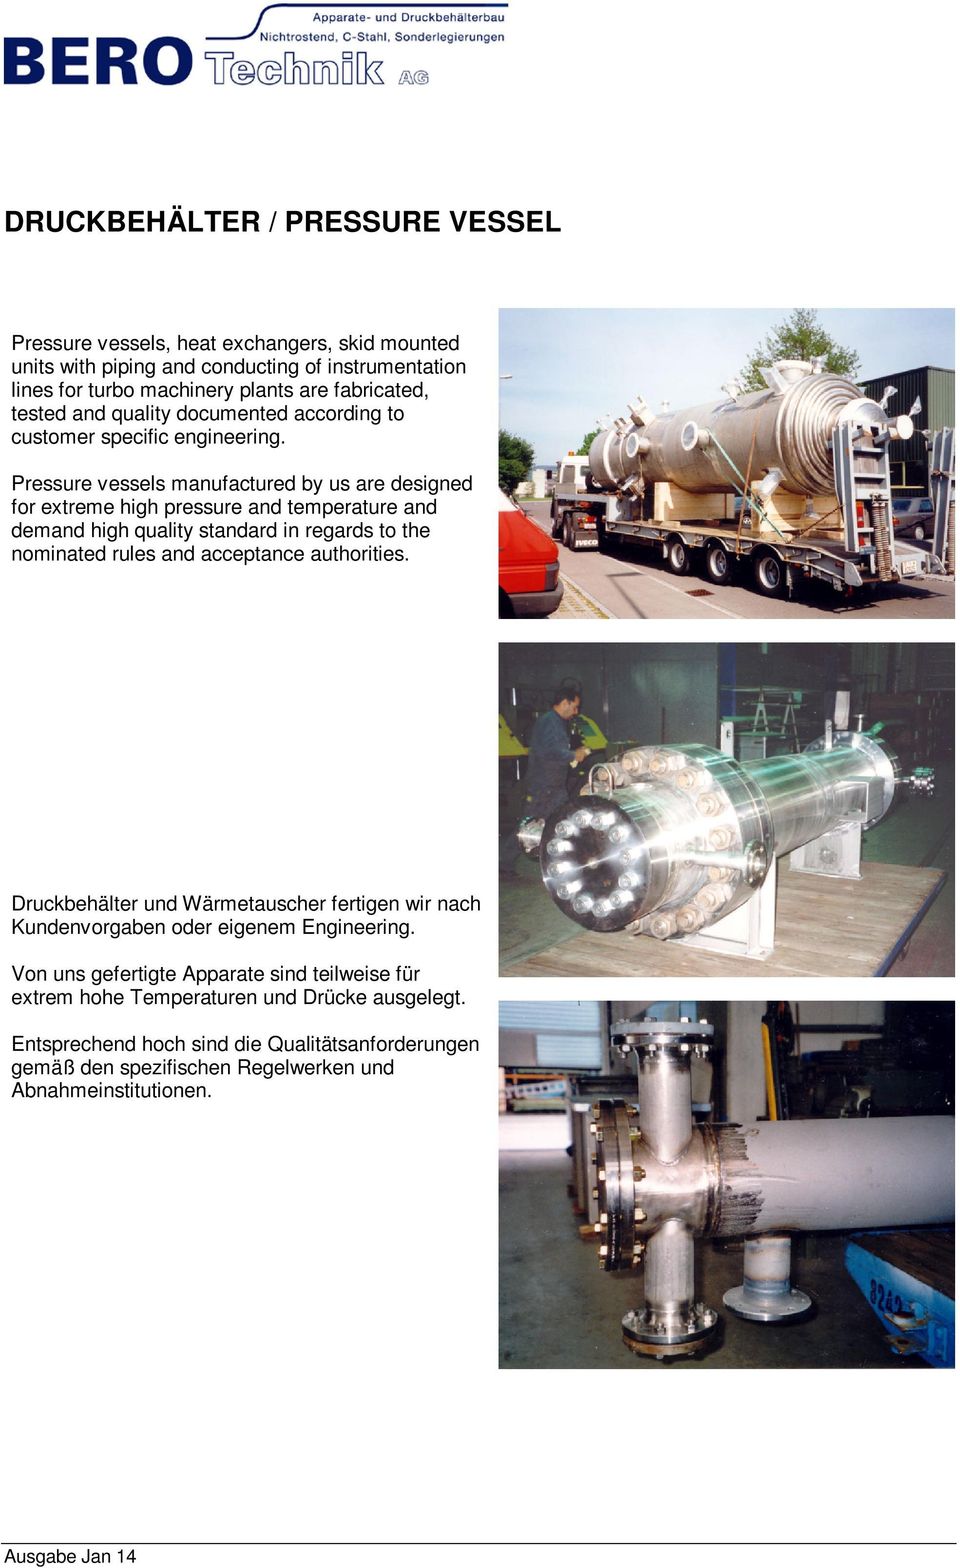 Pressure vessels manufactured by us are designed for extreme high pressure and temperature and demand high quality standard in regards to the nominated rules and acceptance